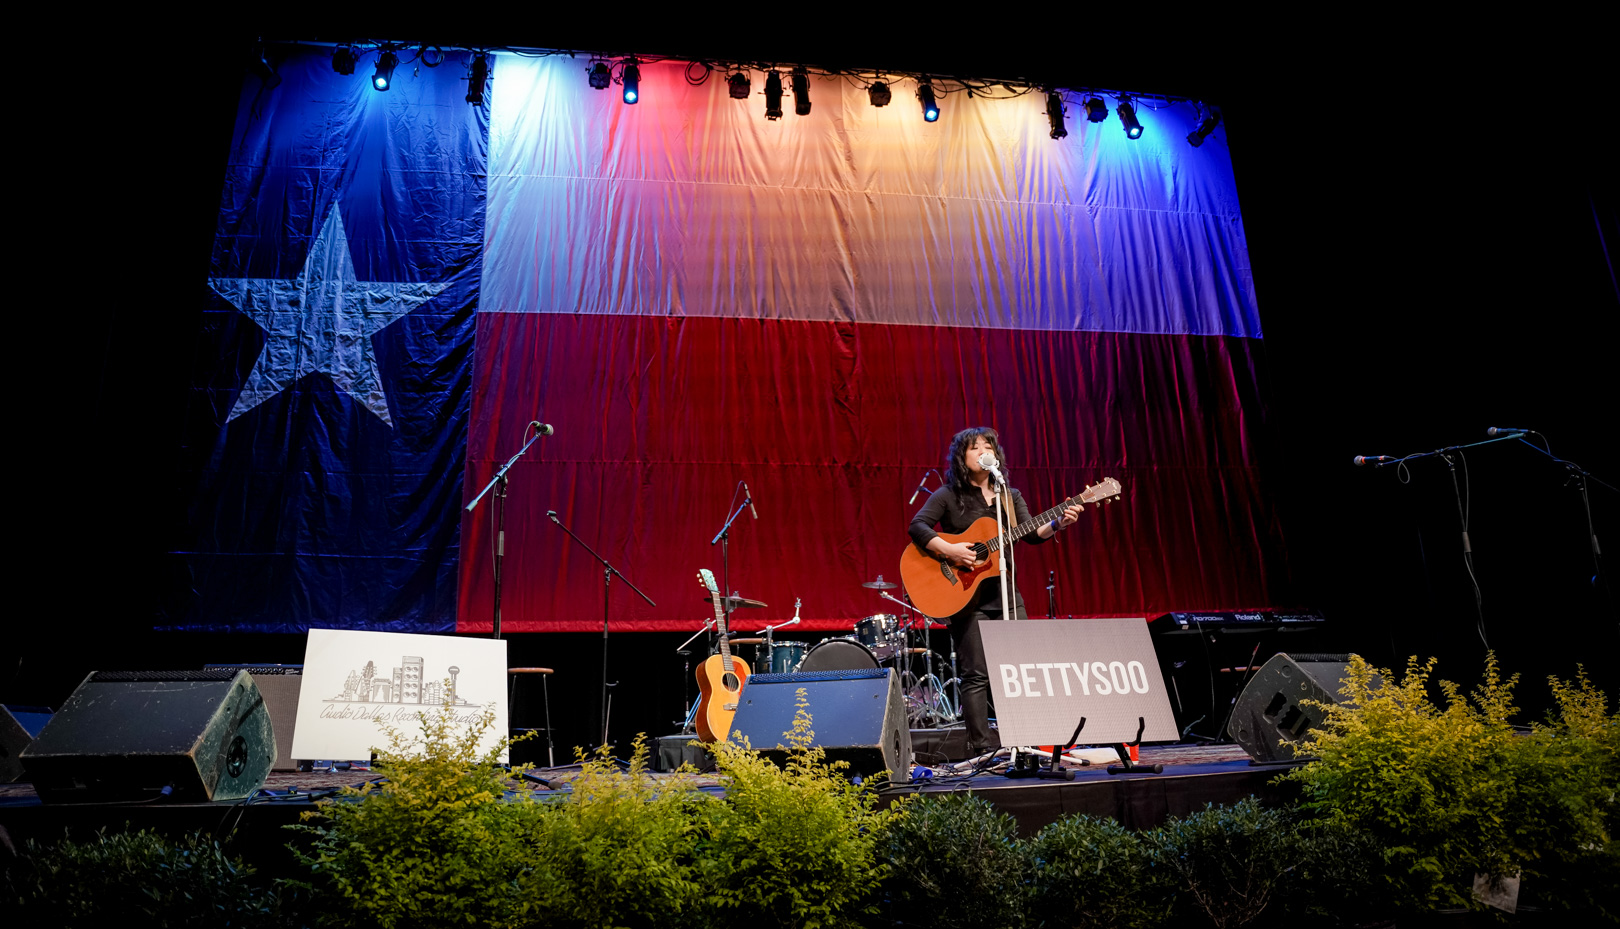 A woman plays guitar in front of a giant Texas flag on stage